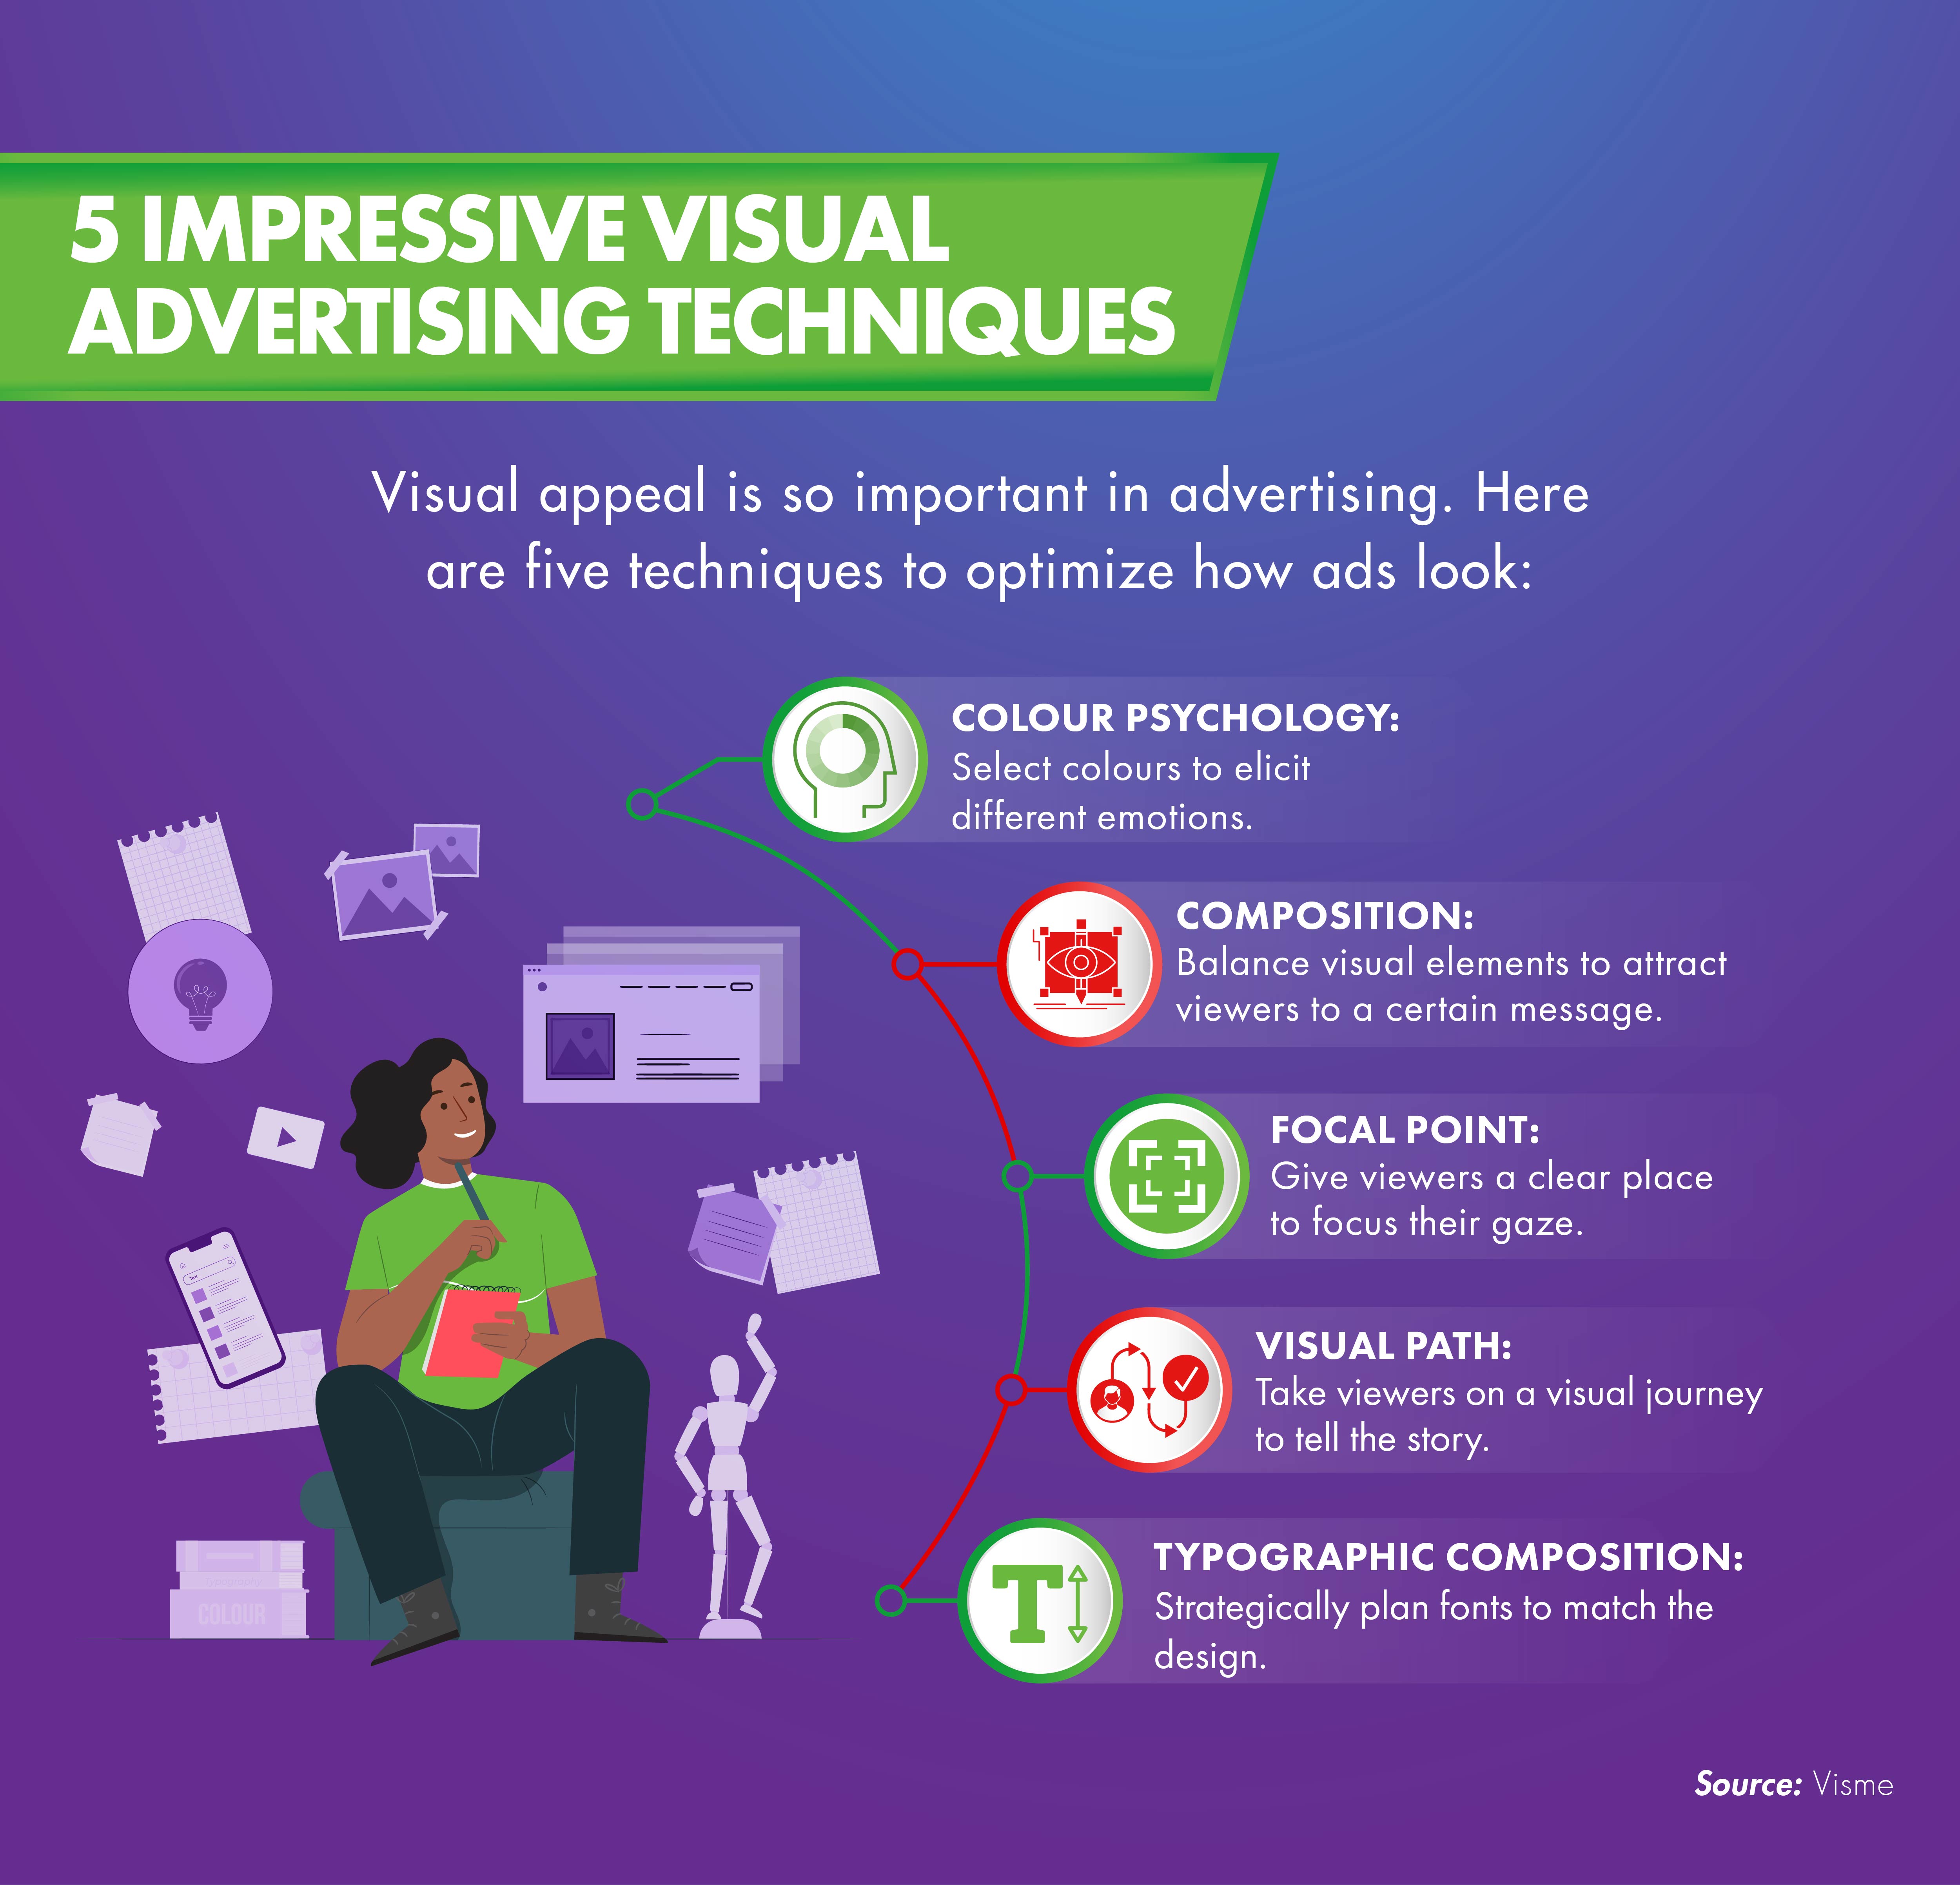 A list of five techniques used to make advertisements visually appealing and effective.